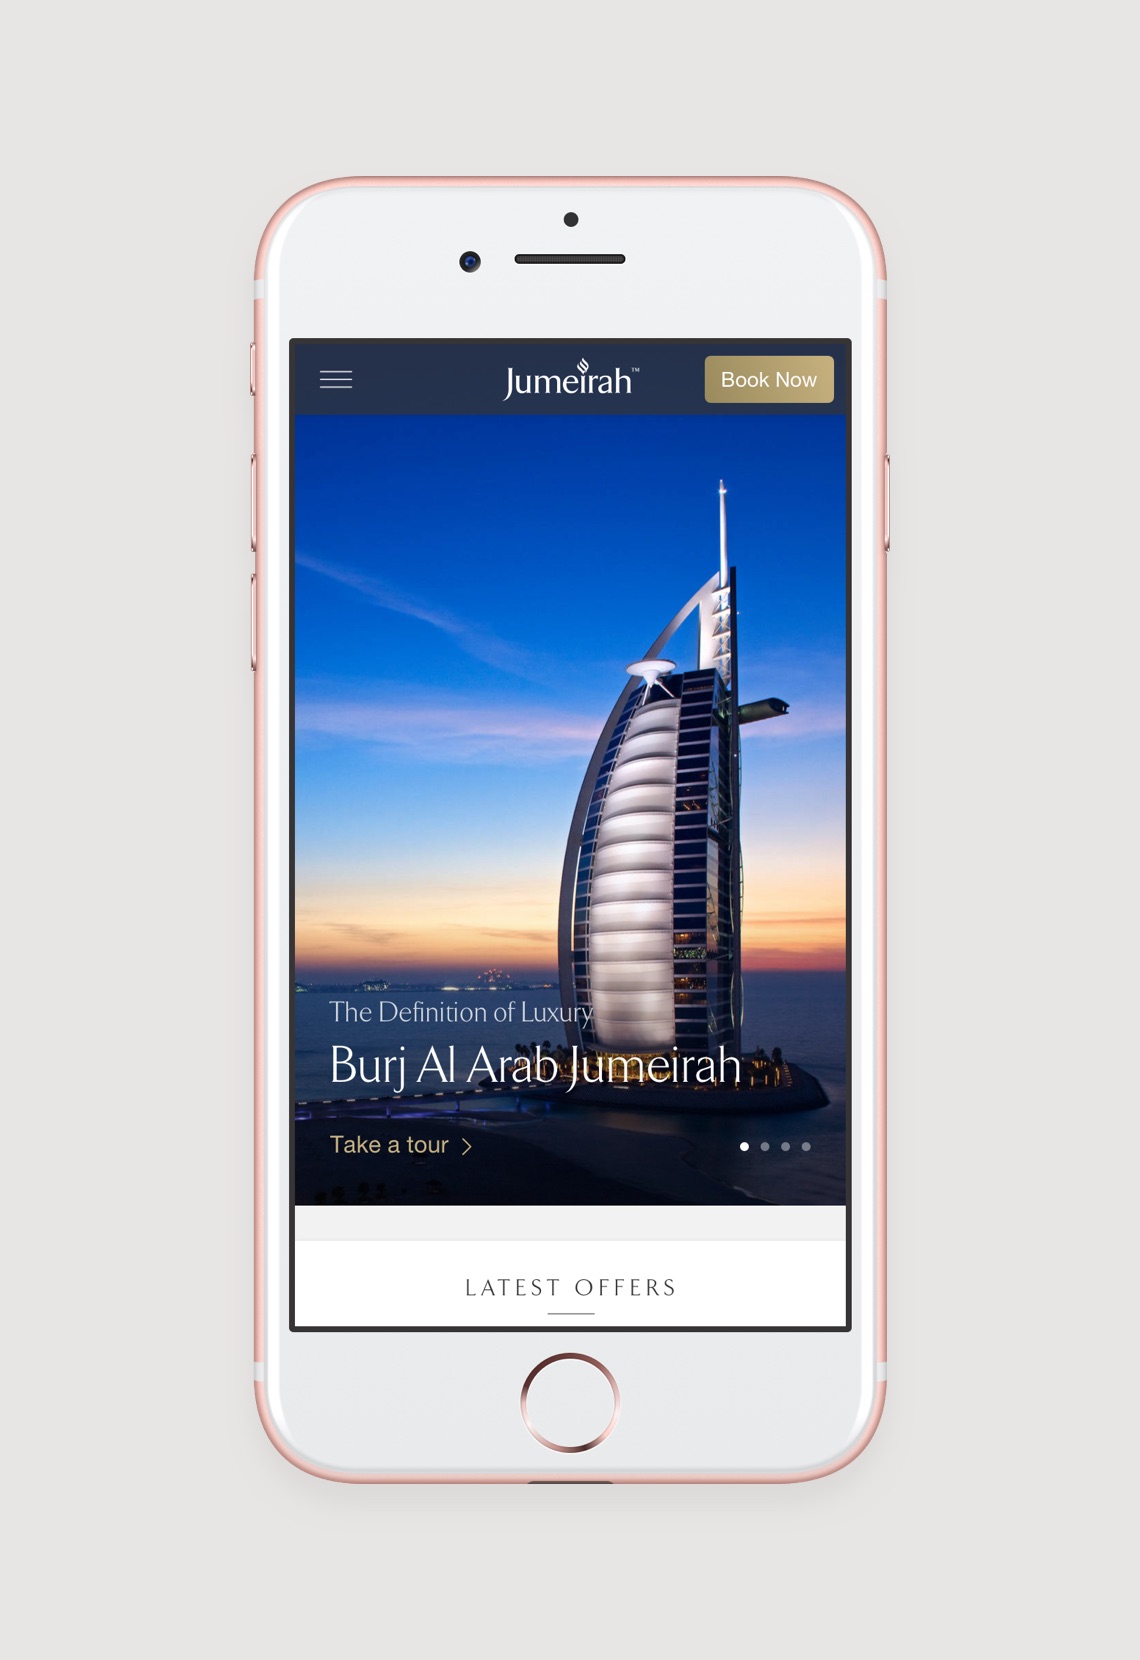 An overhaul to Jumeirah’s mobile website experience